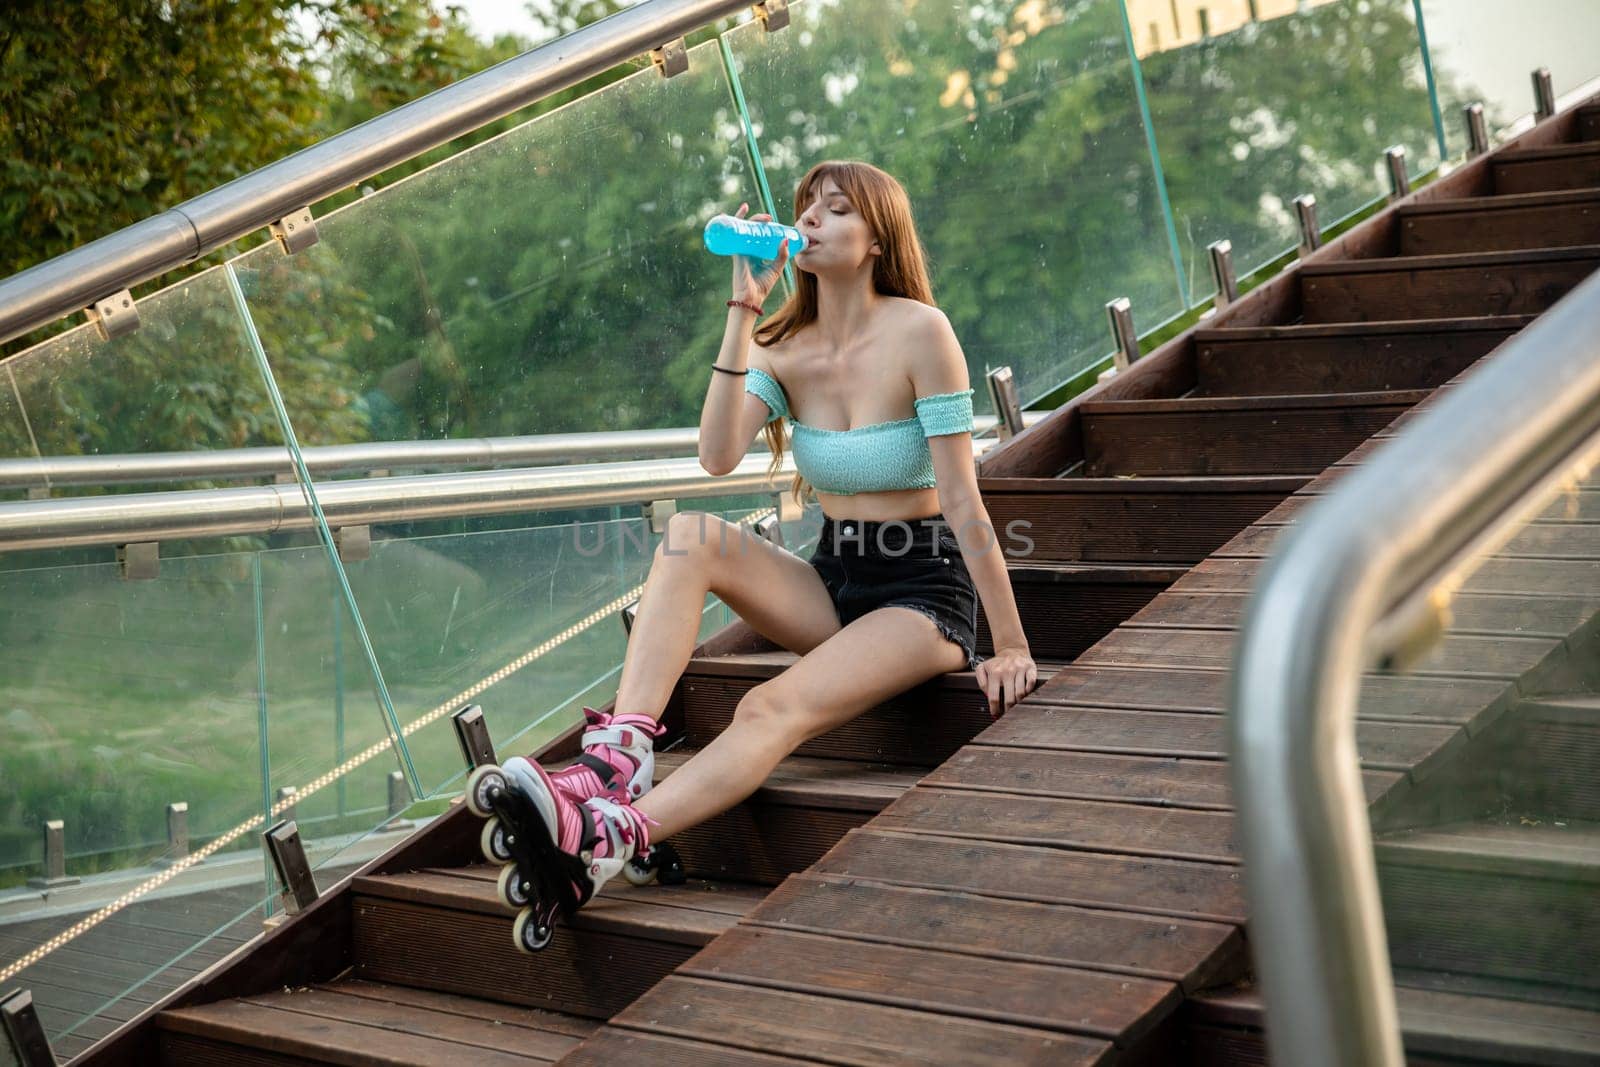 Long-haired skater girl relaxes after skating. The girl is sitting on a wooden staircase. She is drinking a from a bottle. Through the glass balustrade you can see trees and lots of greenery.